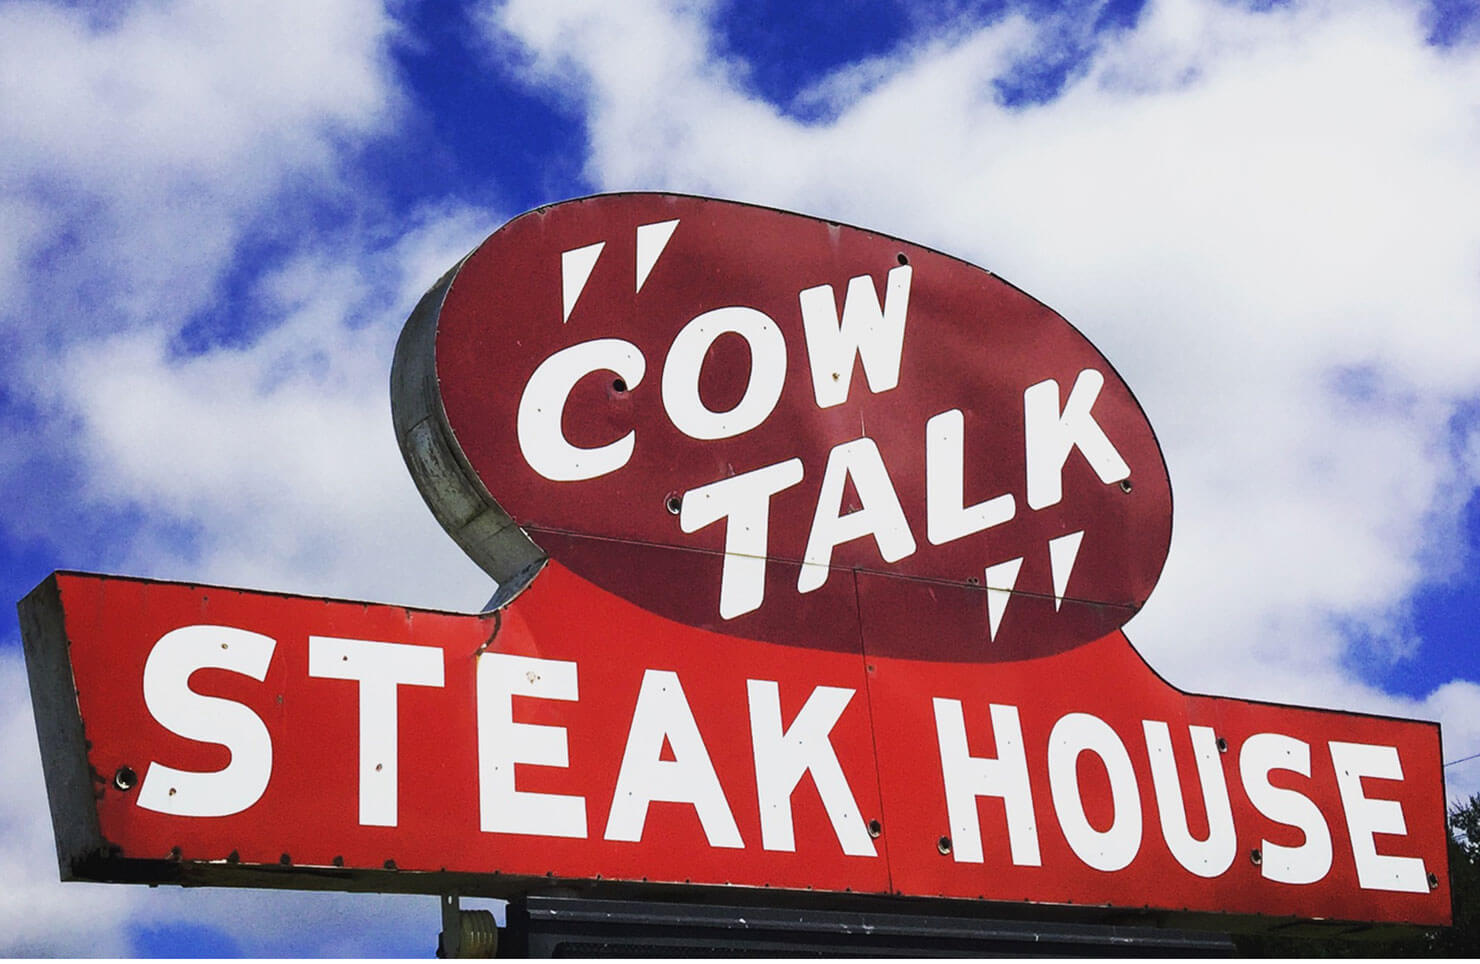 Cow talk sign